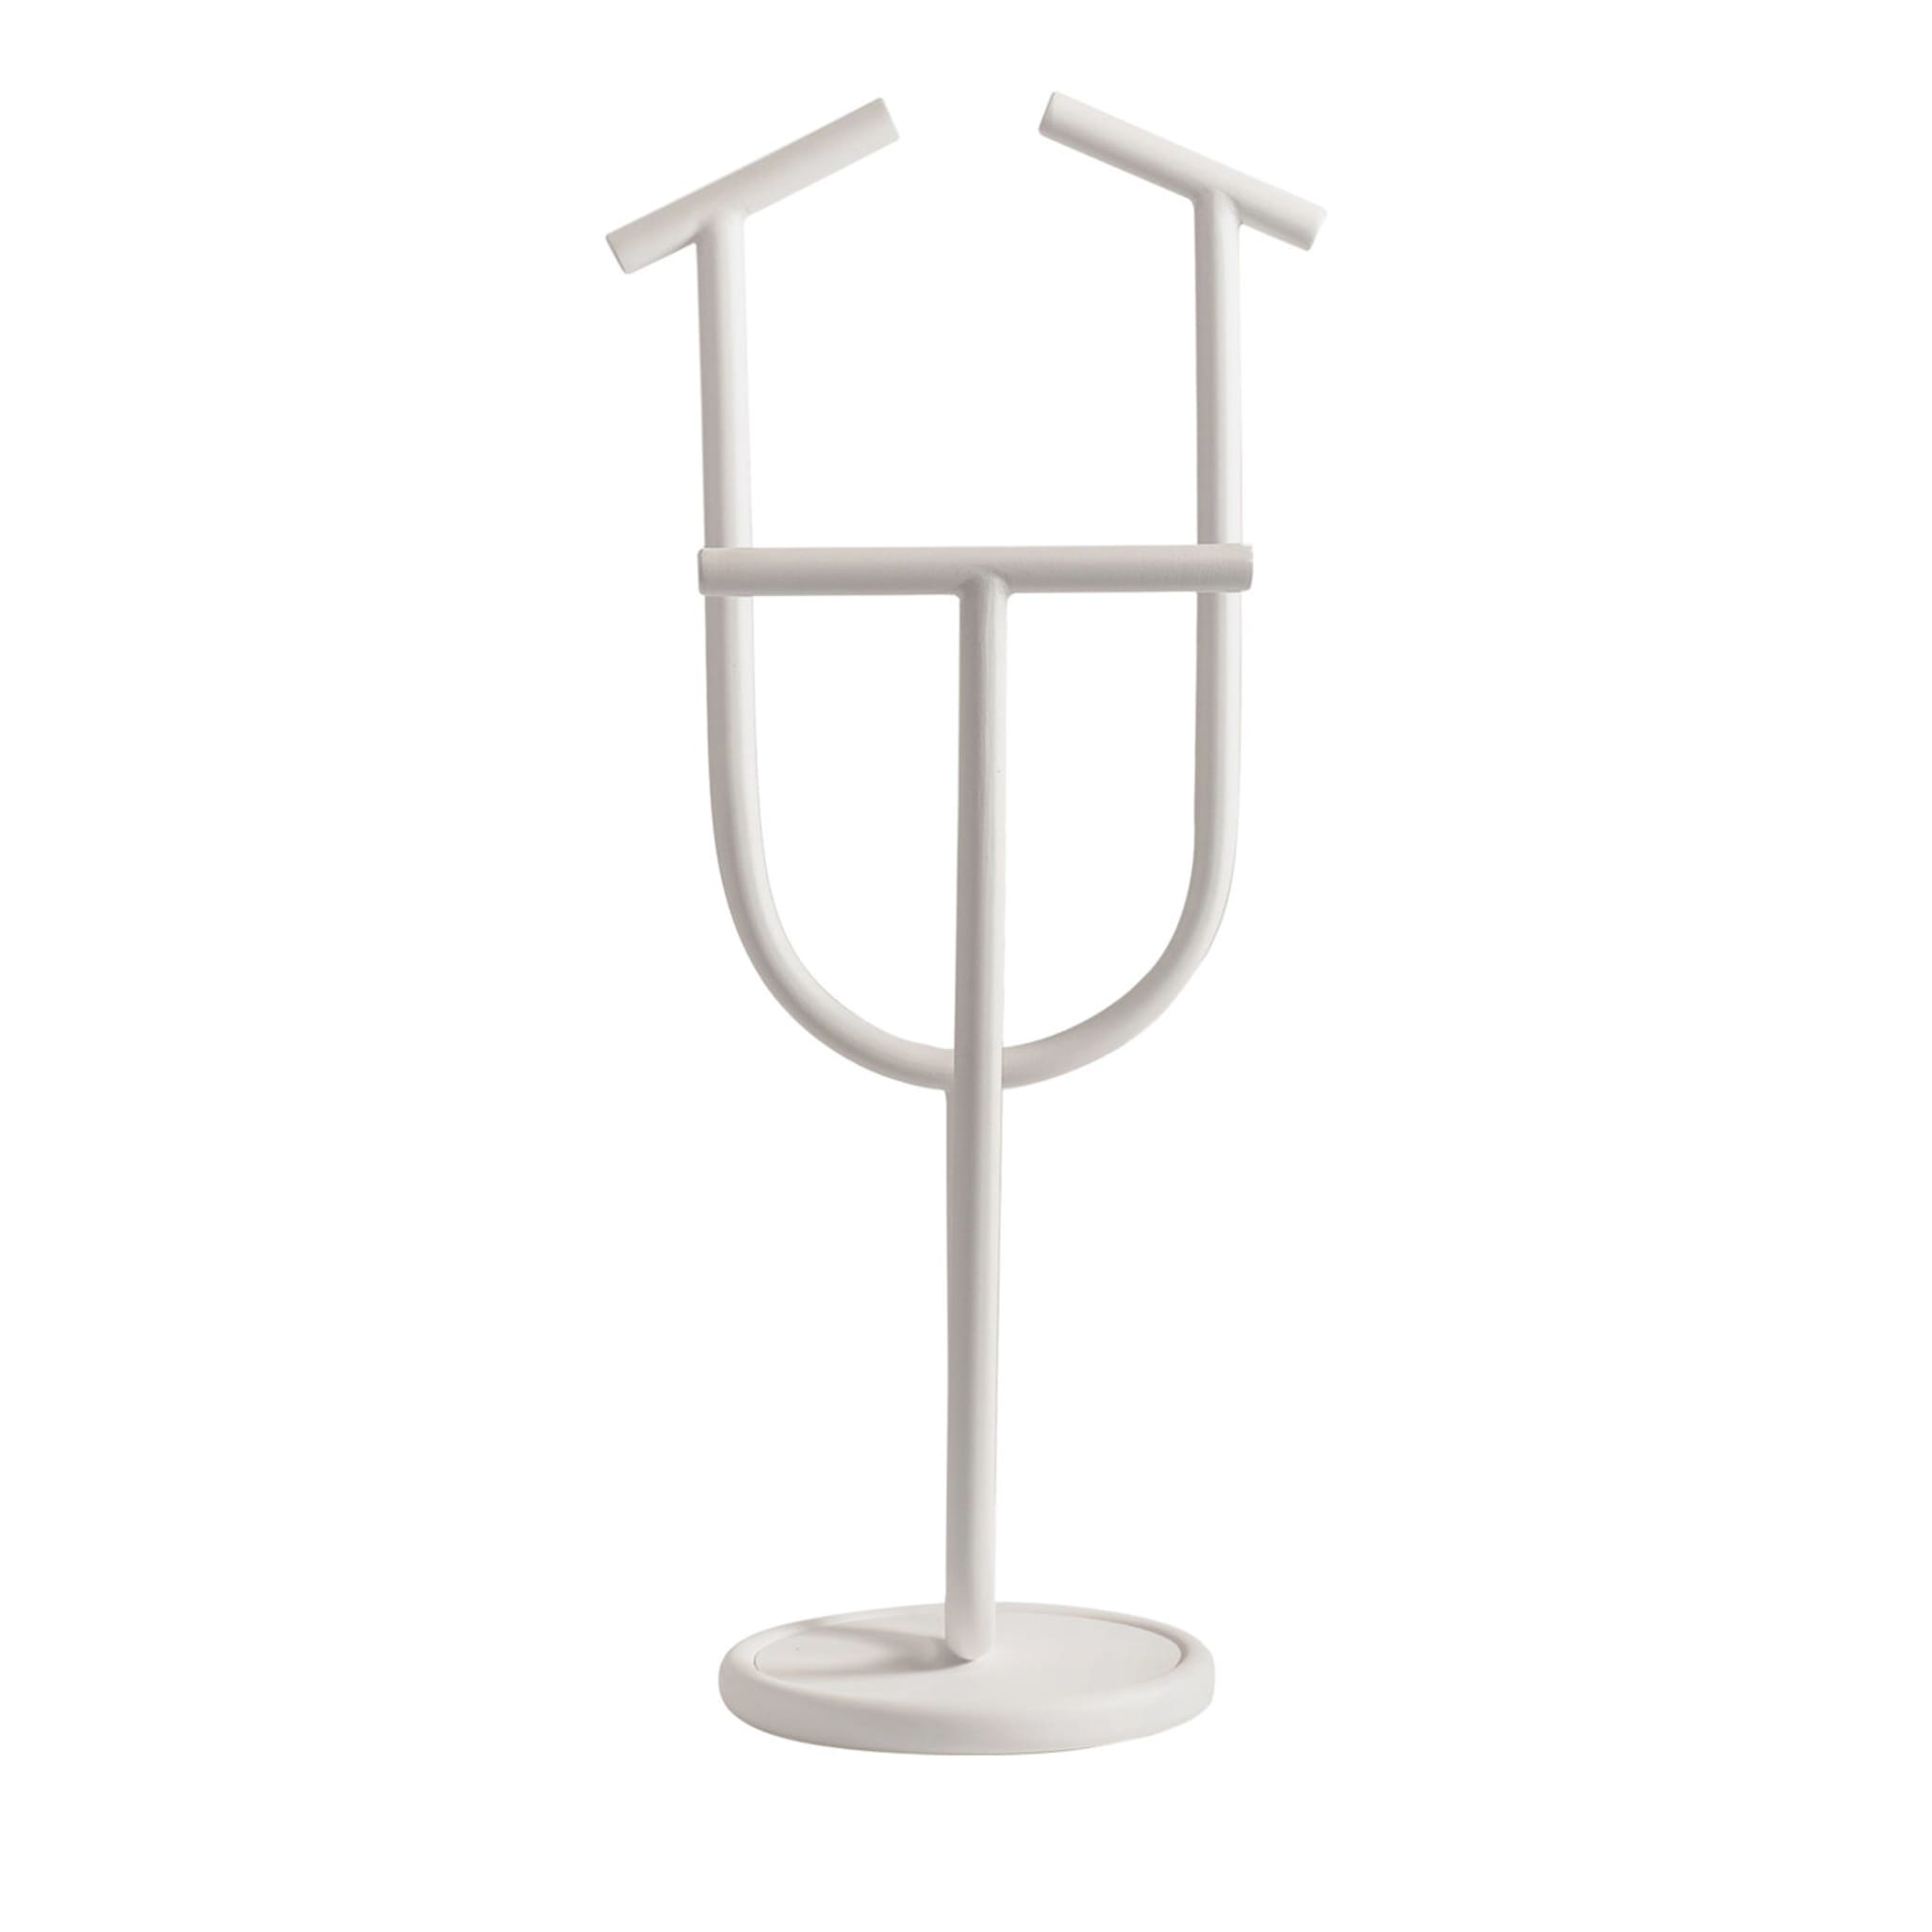 Roommate White Bloom Valet Stand by Sovrappensiero Design Studio - Main view